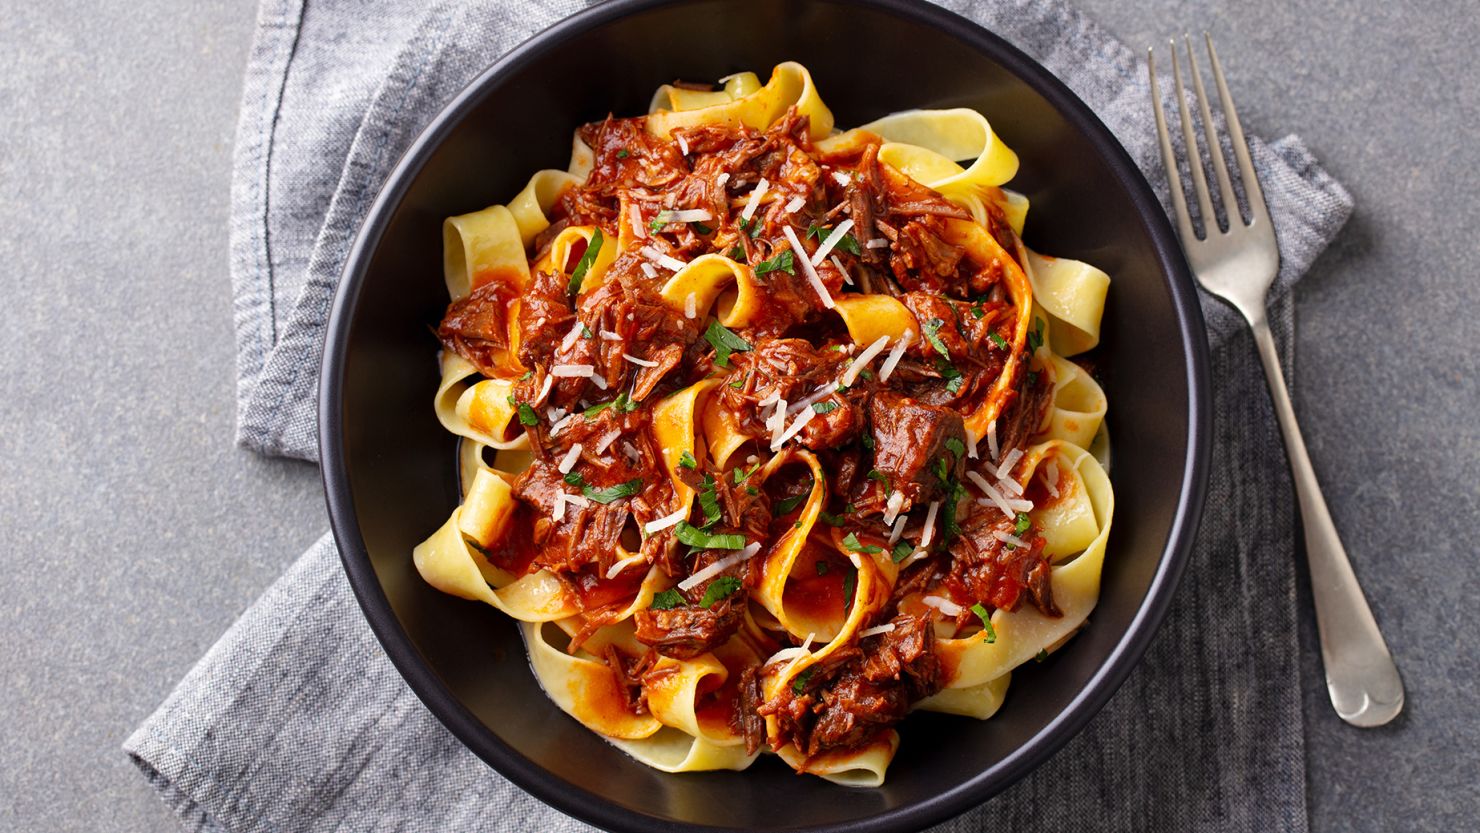 Consider an unusual pasta or scope out the refrigerated fresh pasta for a fun grocery upgrade.